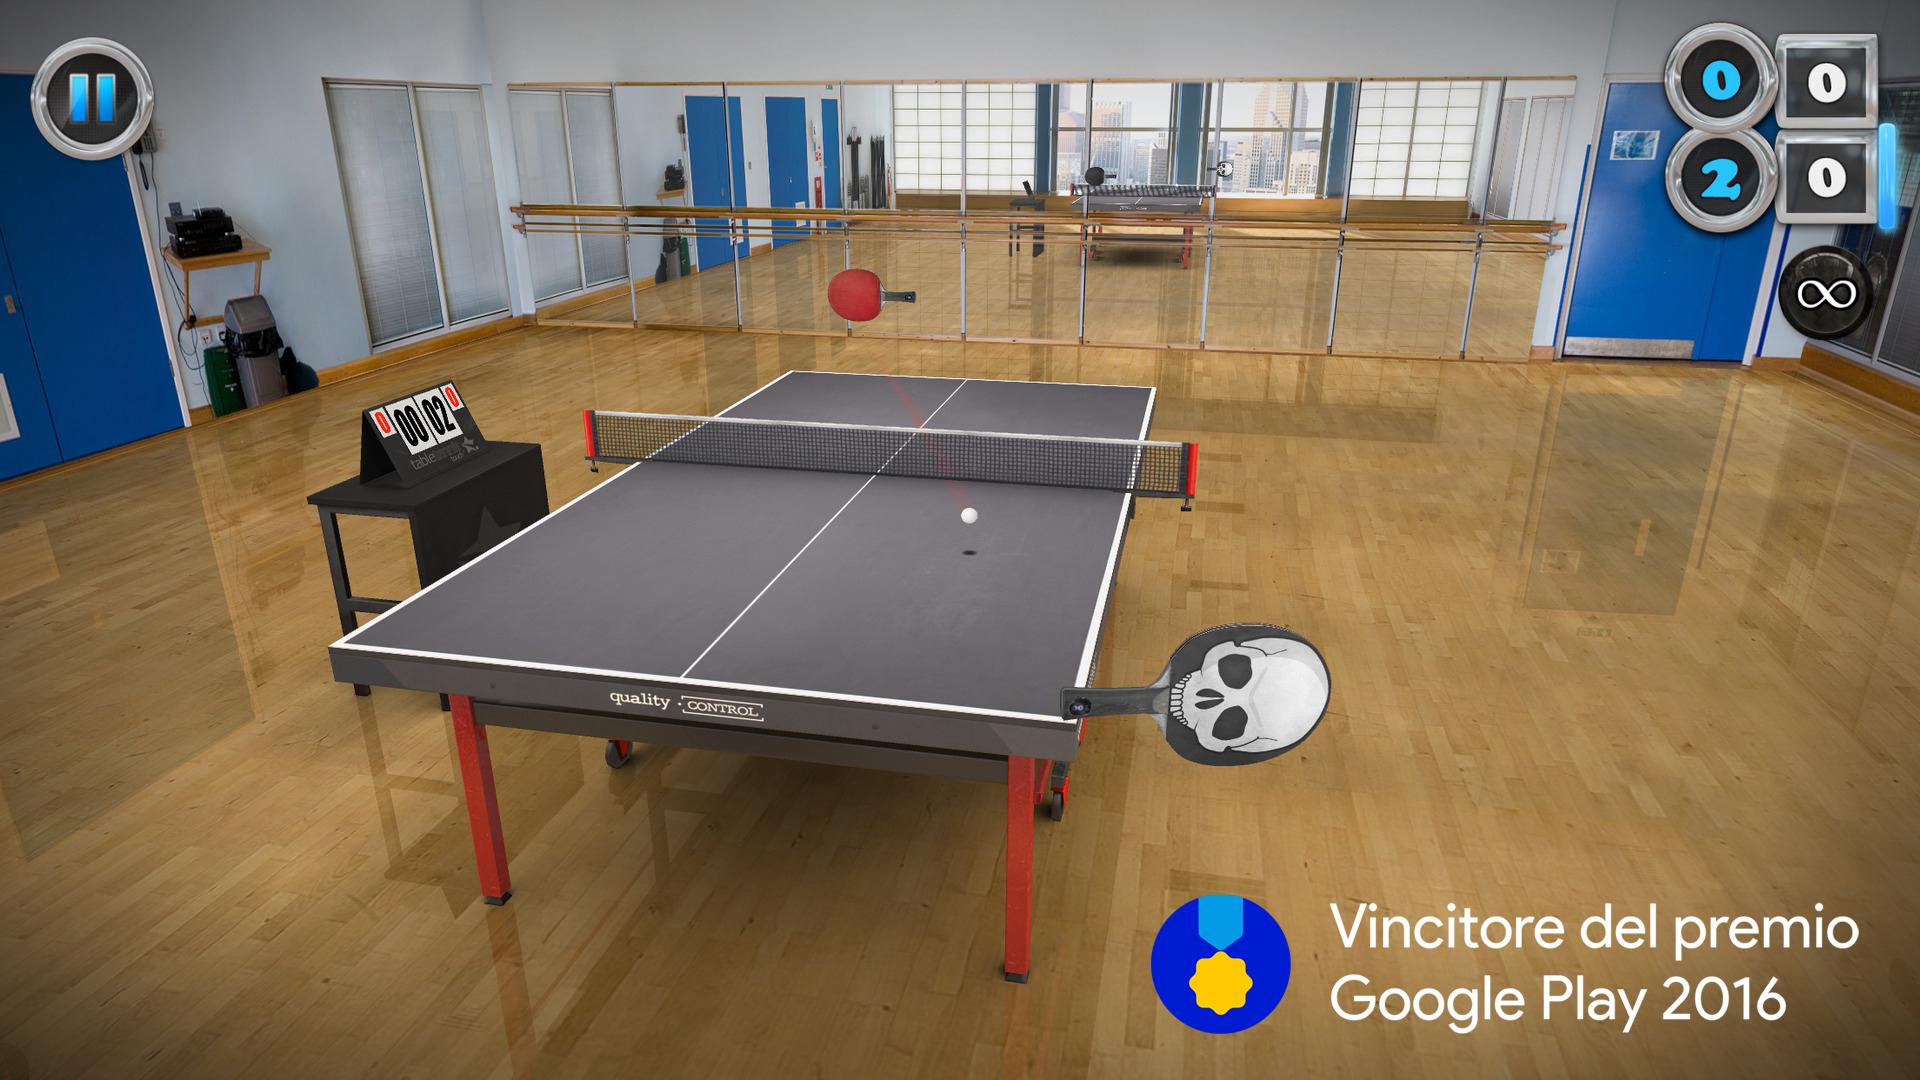 Android application Table Tennis Touch screenshort